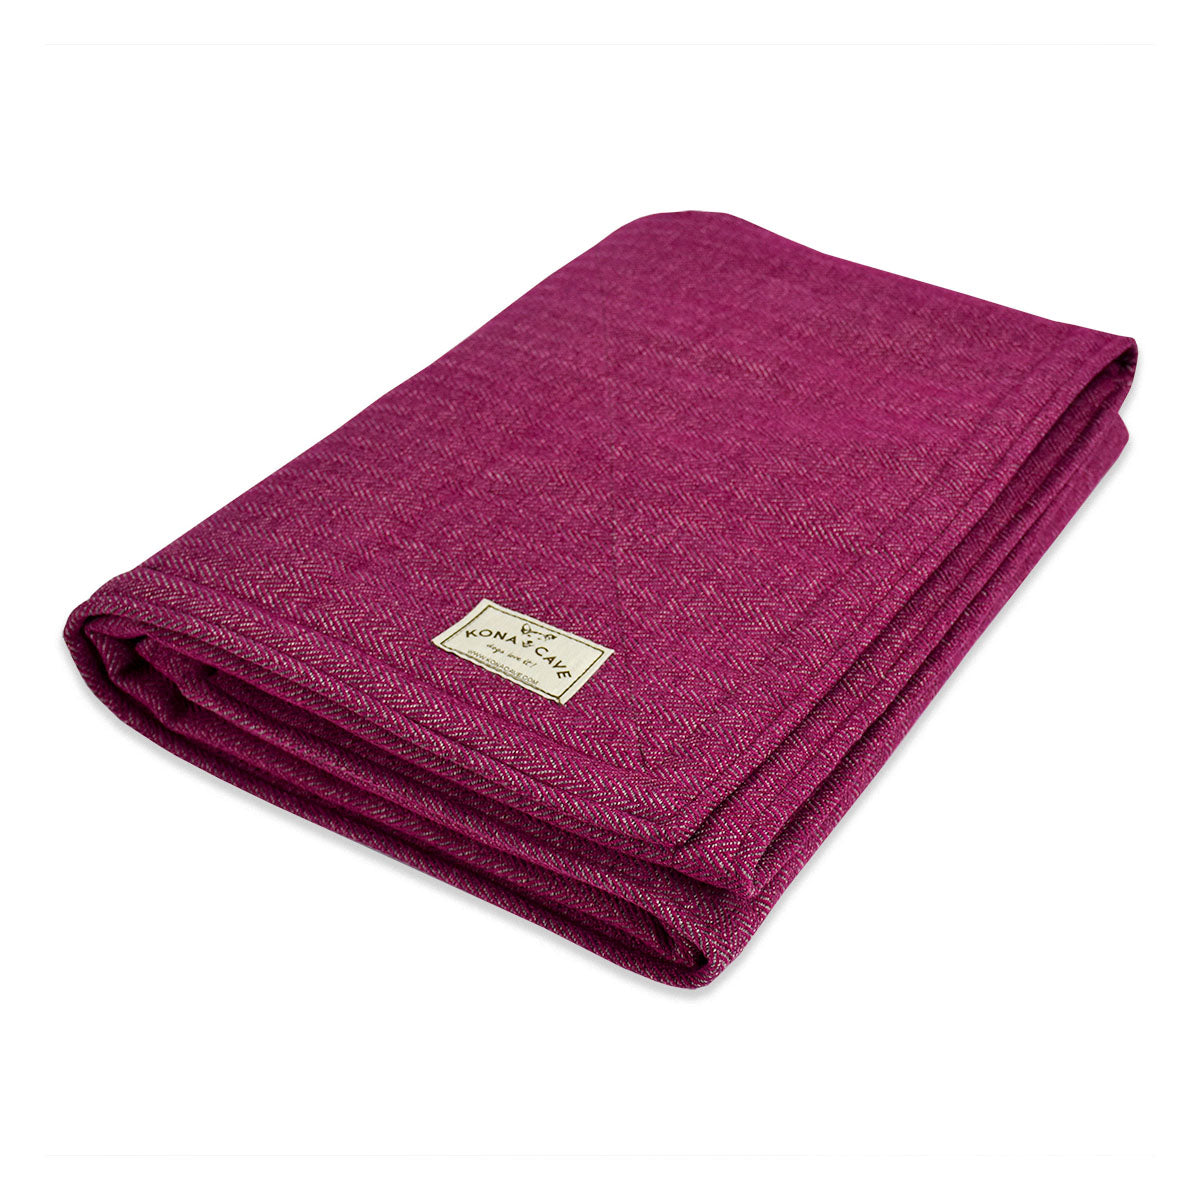 KONA CAVE® Luxury blankets for pets and people. Thick Pink blanket lined with soft sherpa fleece. Pets love this blanket. Protect furniture with pet blankets. 